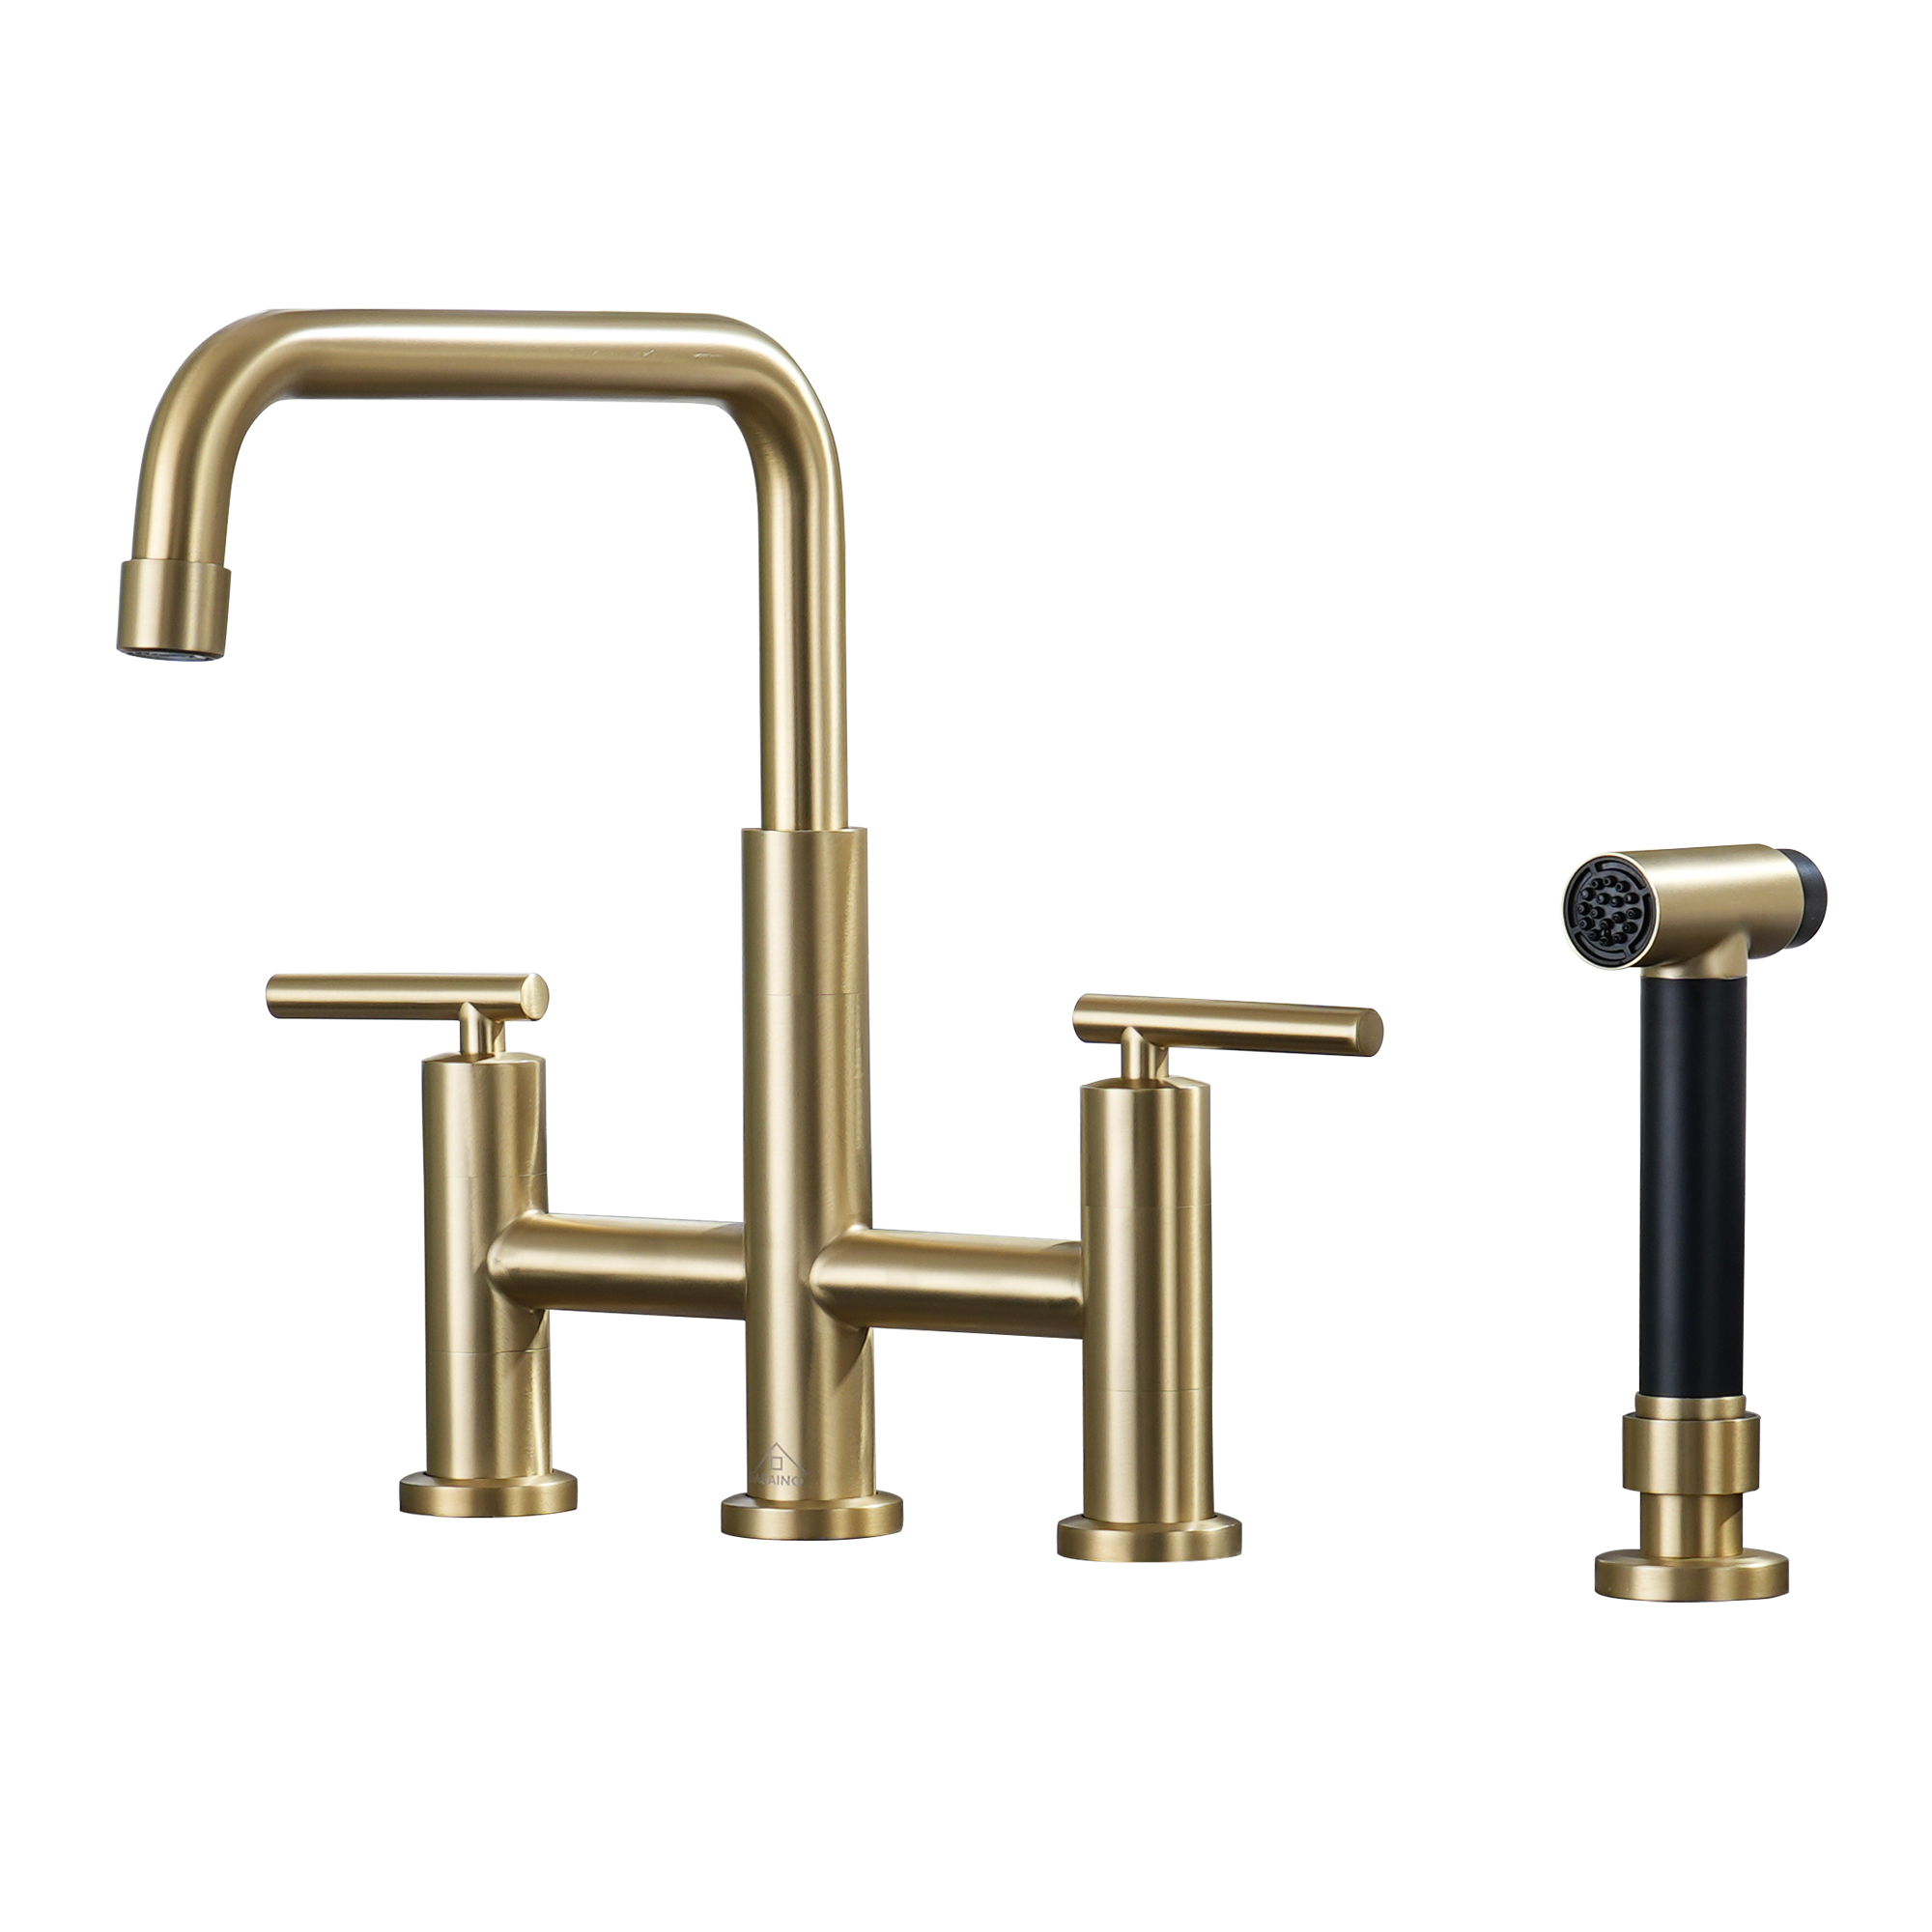 2-Handle Bridge Kitchen Faucet with Pull-Out Spray in a Variety of Finishes Matte Black/Brushed Nickel/Brushed Gold 2 Handle Kitchen Faucets for Washing Dishes